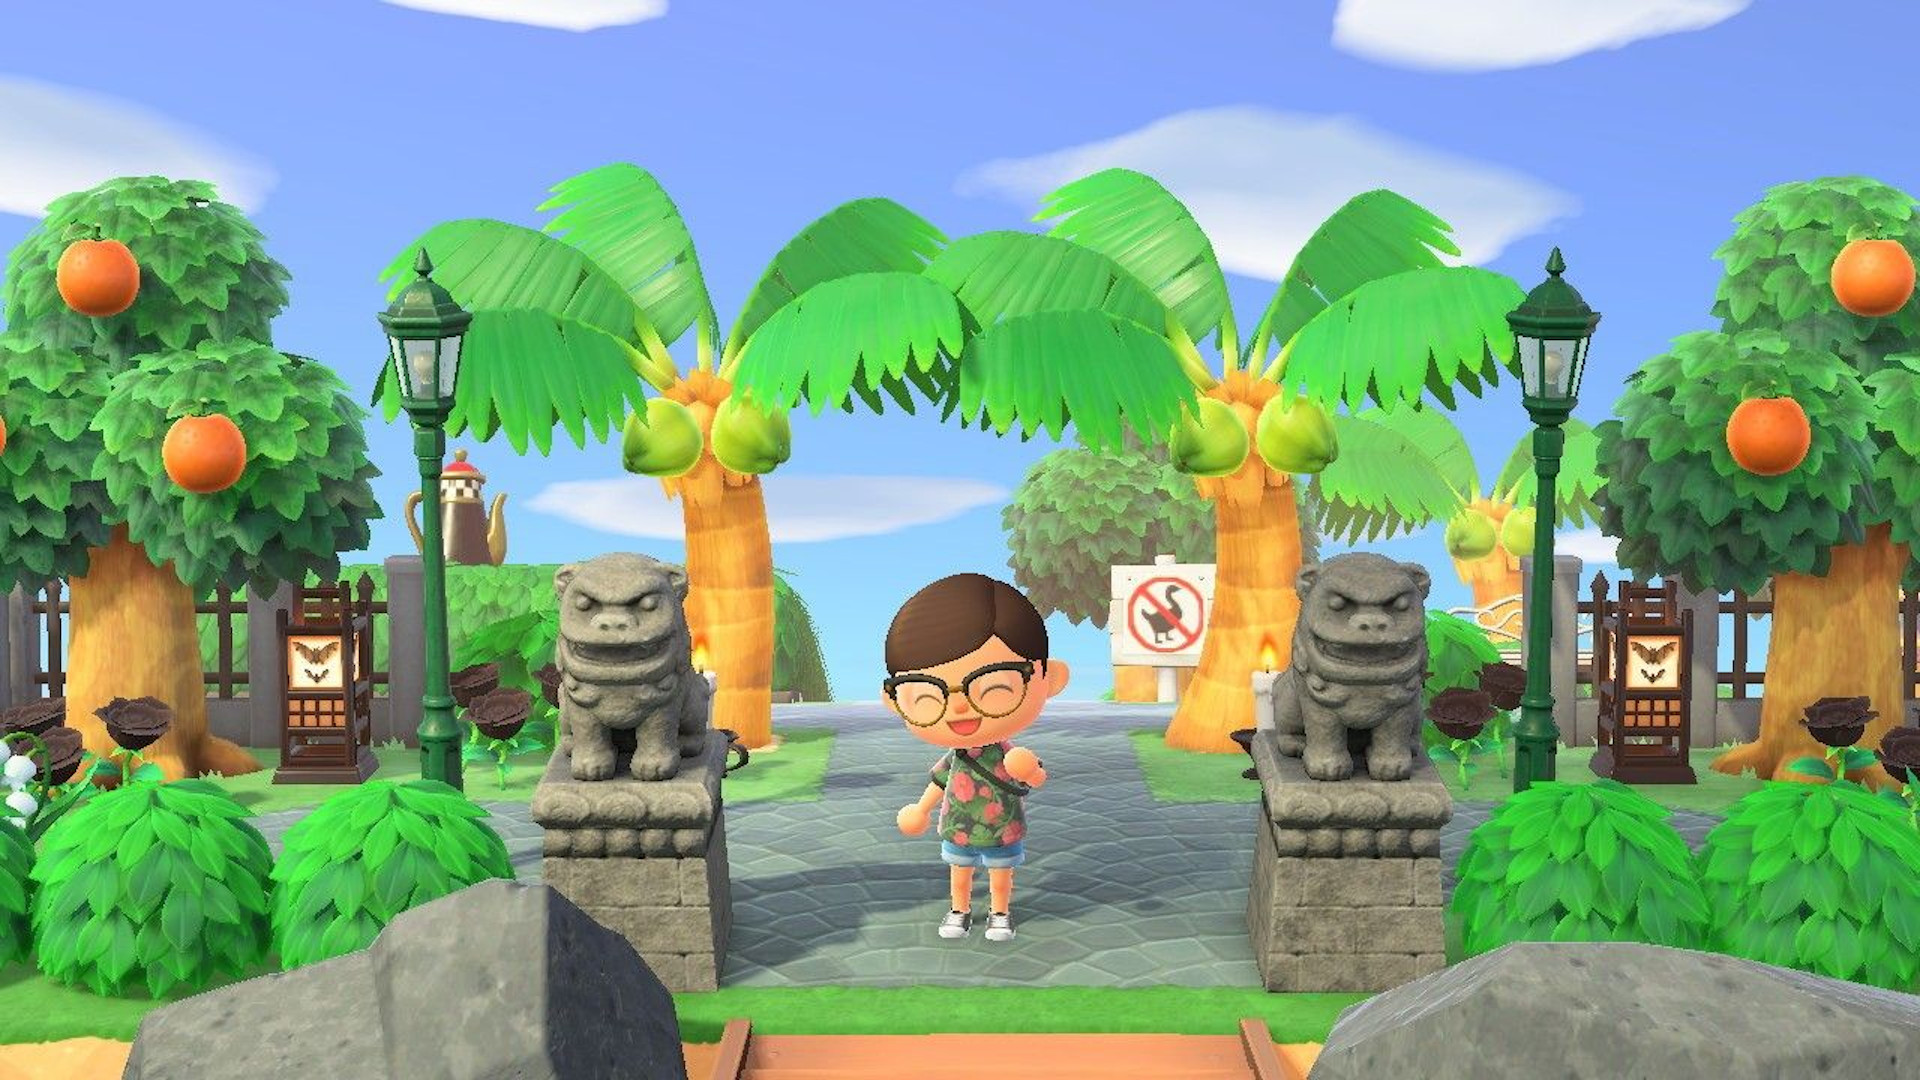 Animal Crossing New Horizons island ideas: An Animal Crossing character stood in a summery, holiday island, posing for the camera with a smile.